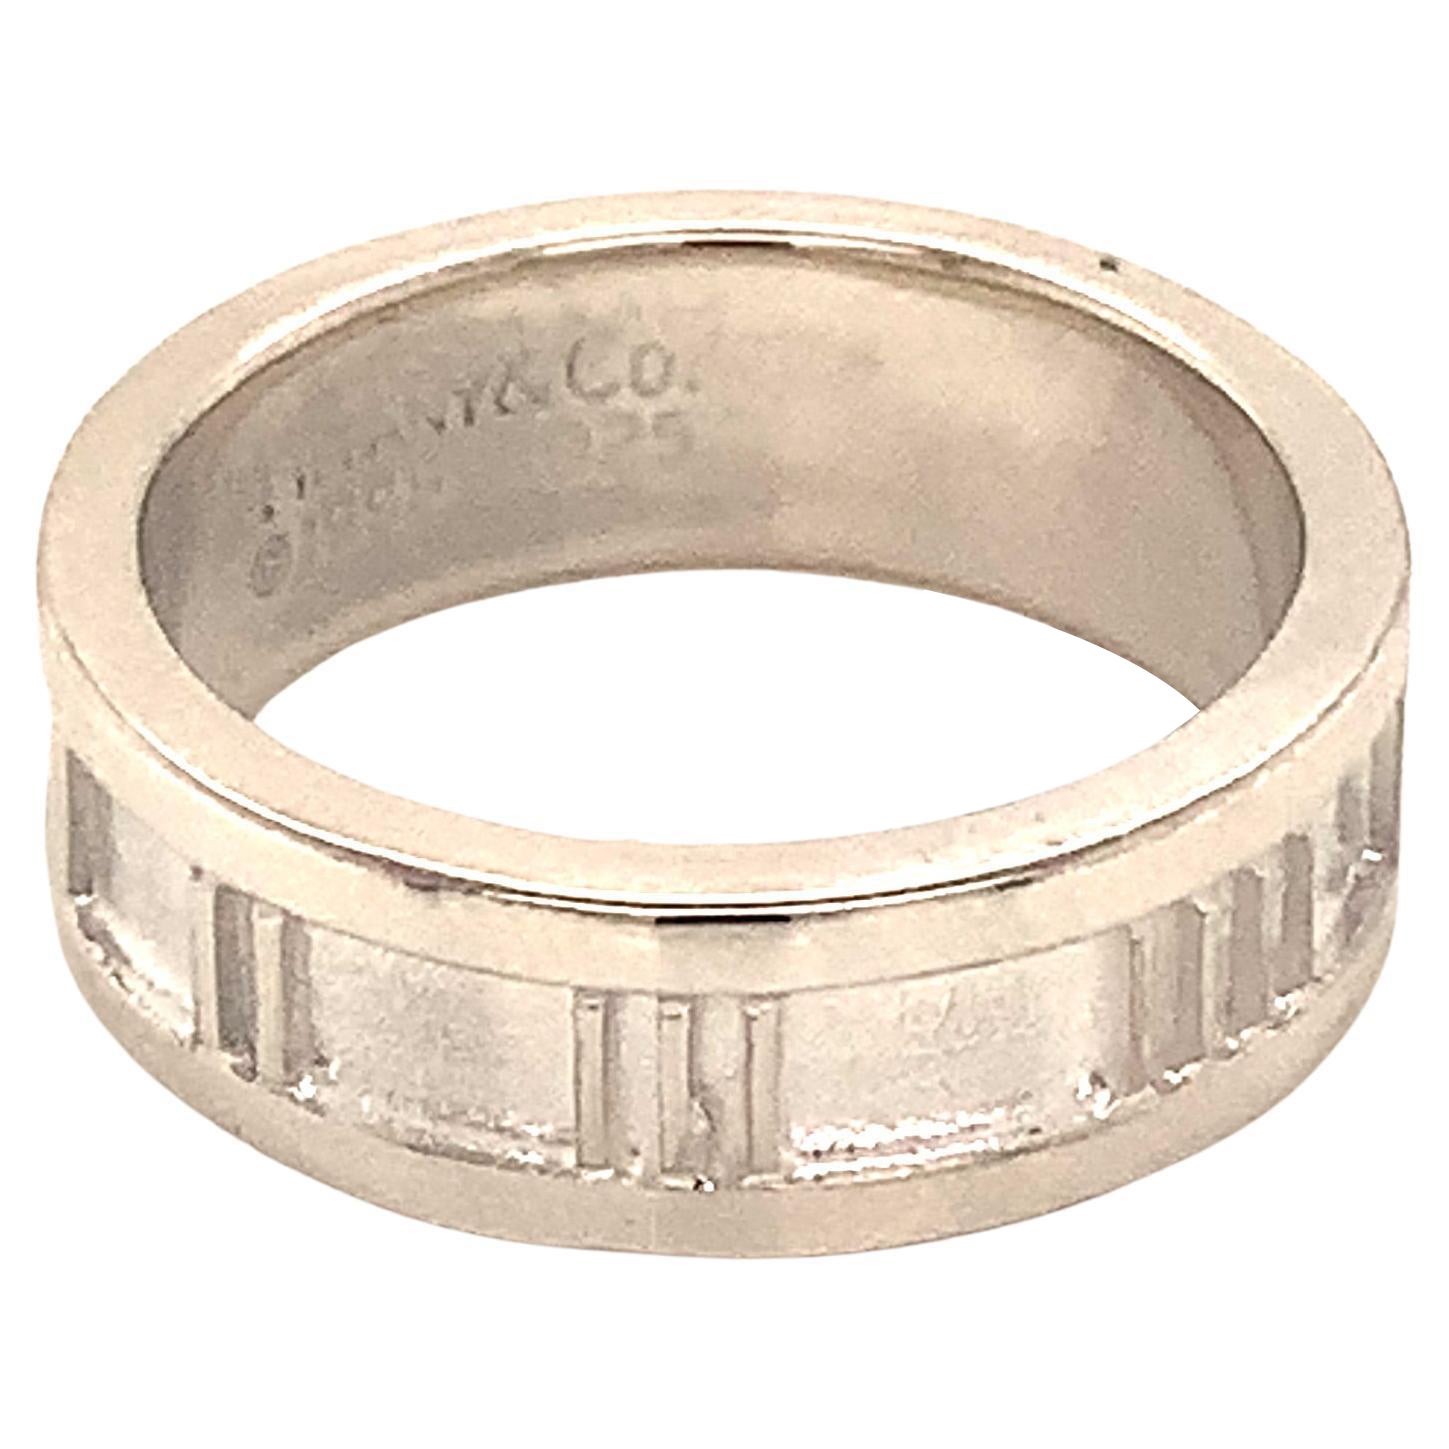 Tiffany & Co. Estate Ring Sterling Silver 4.7 Grams For Sale